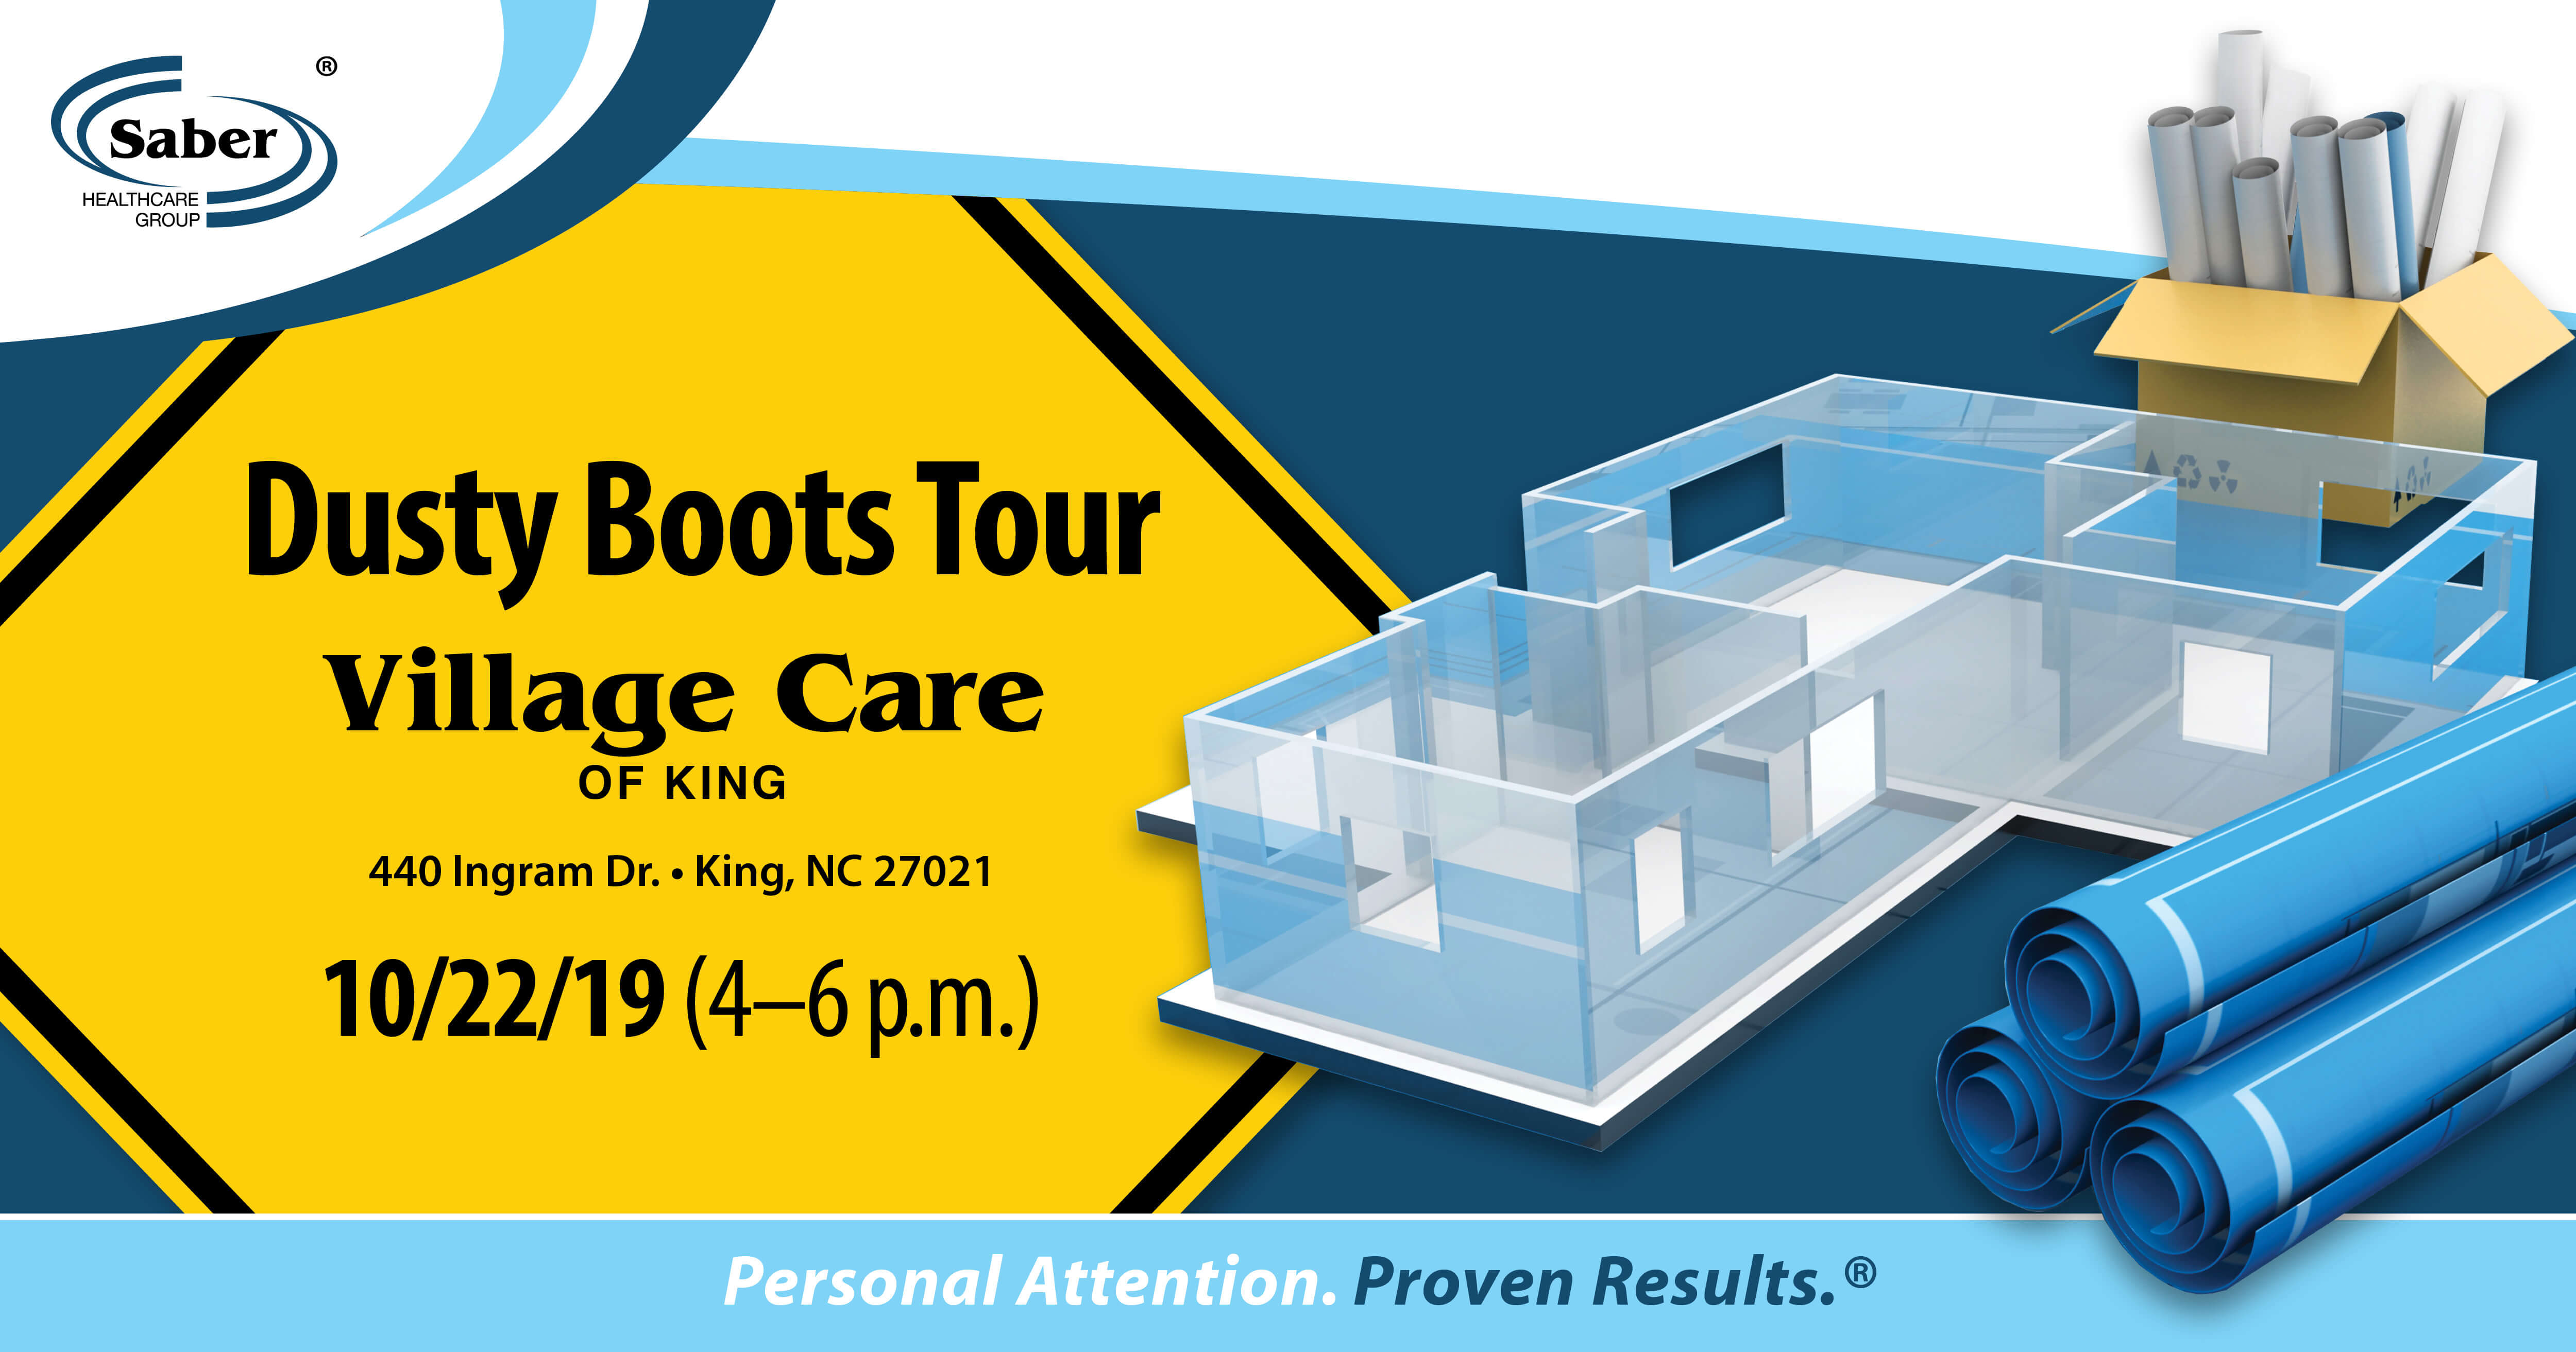 Dusty Boots Tour at Village Care of King